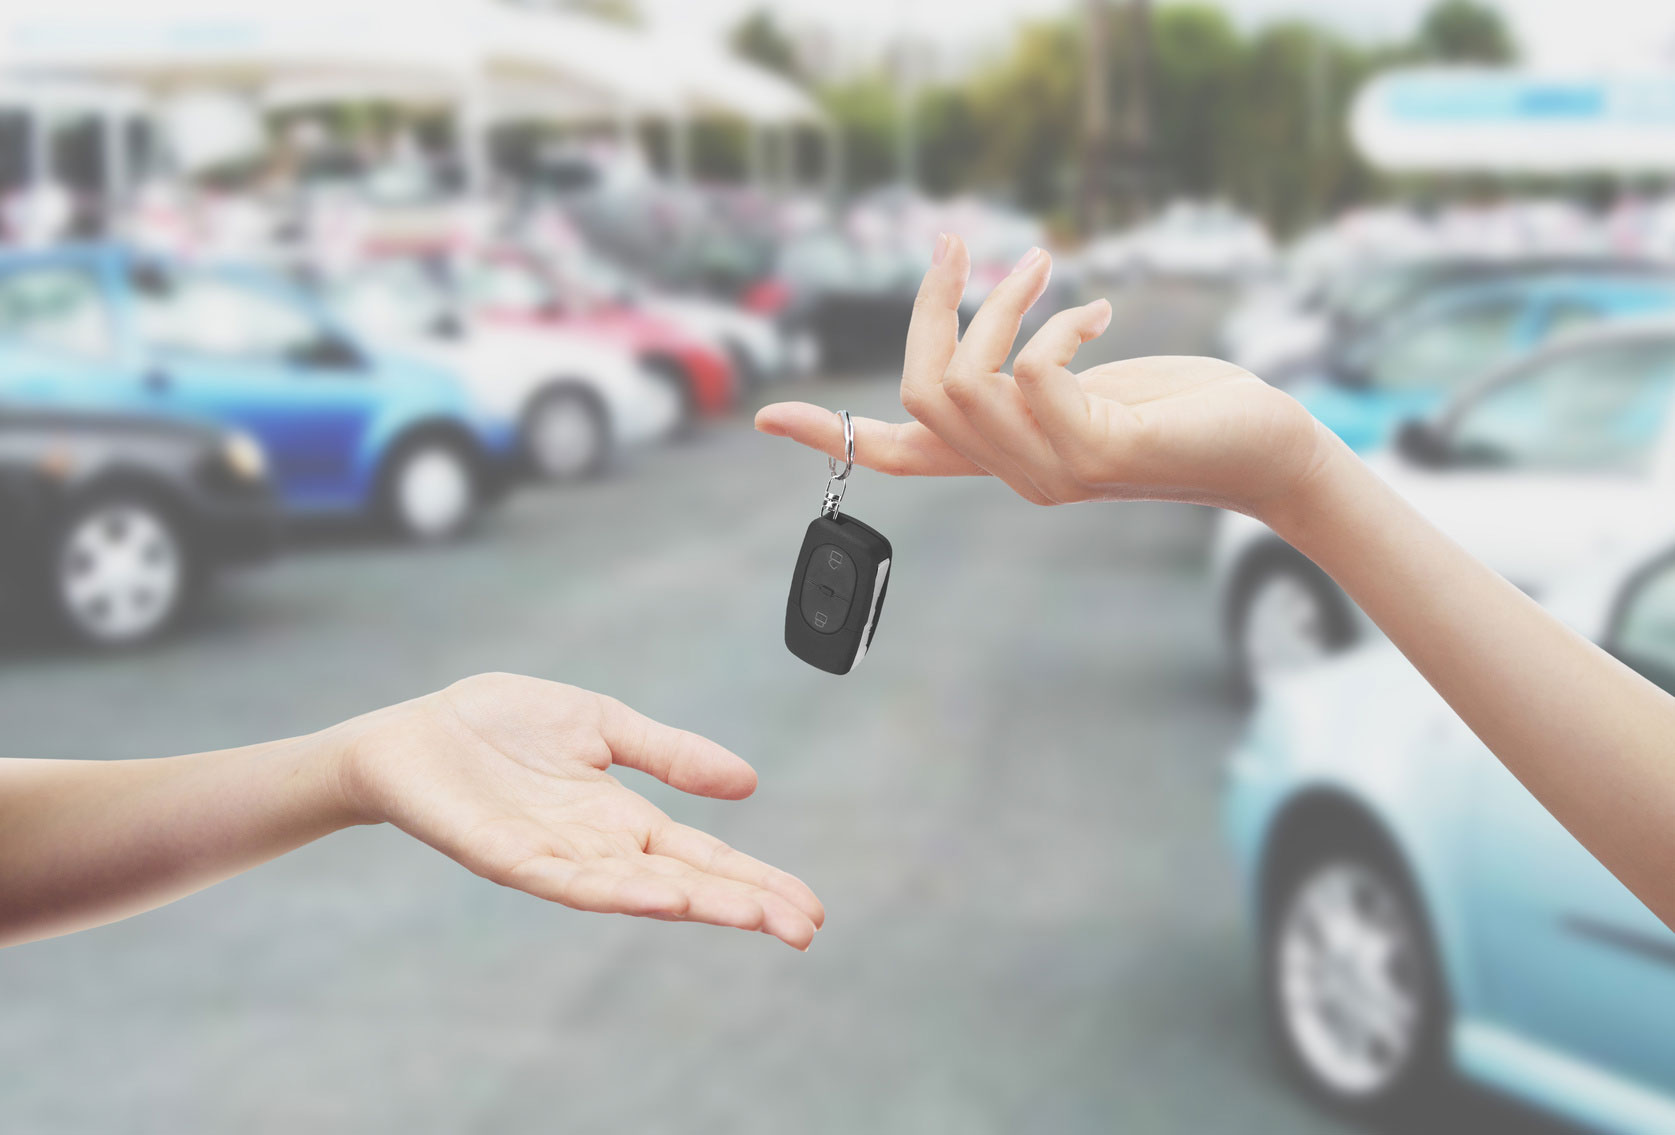 Safe Car Shopping Tips: Look for These Safety Features